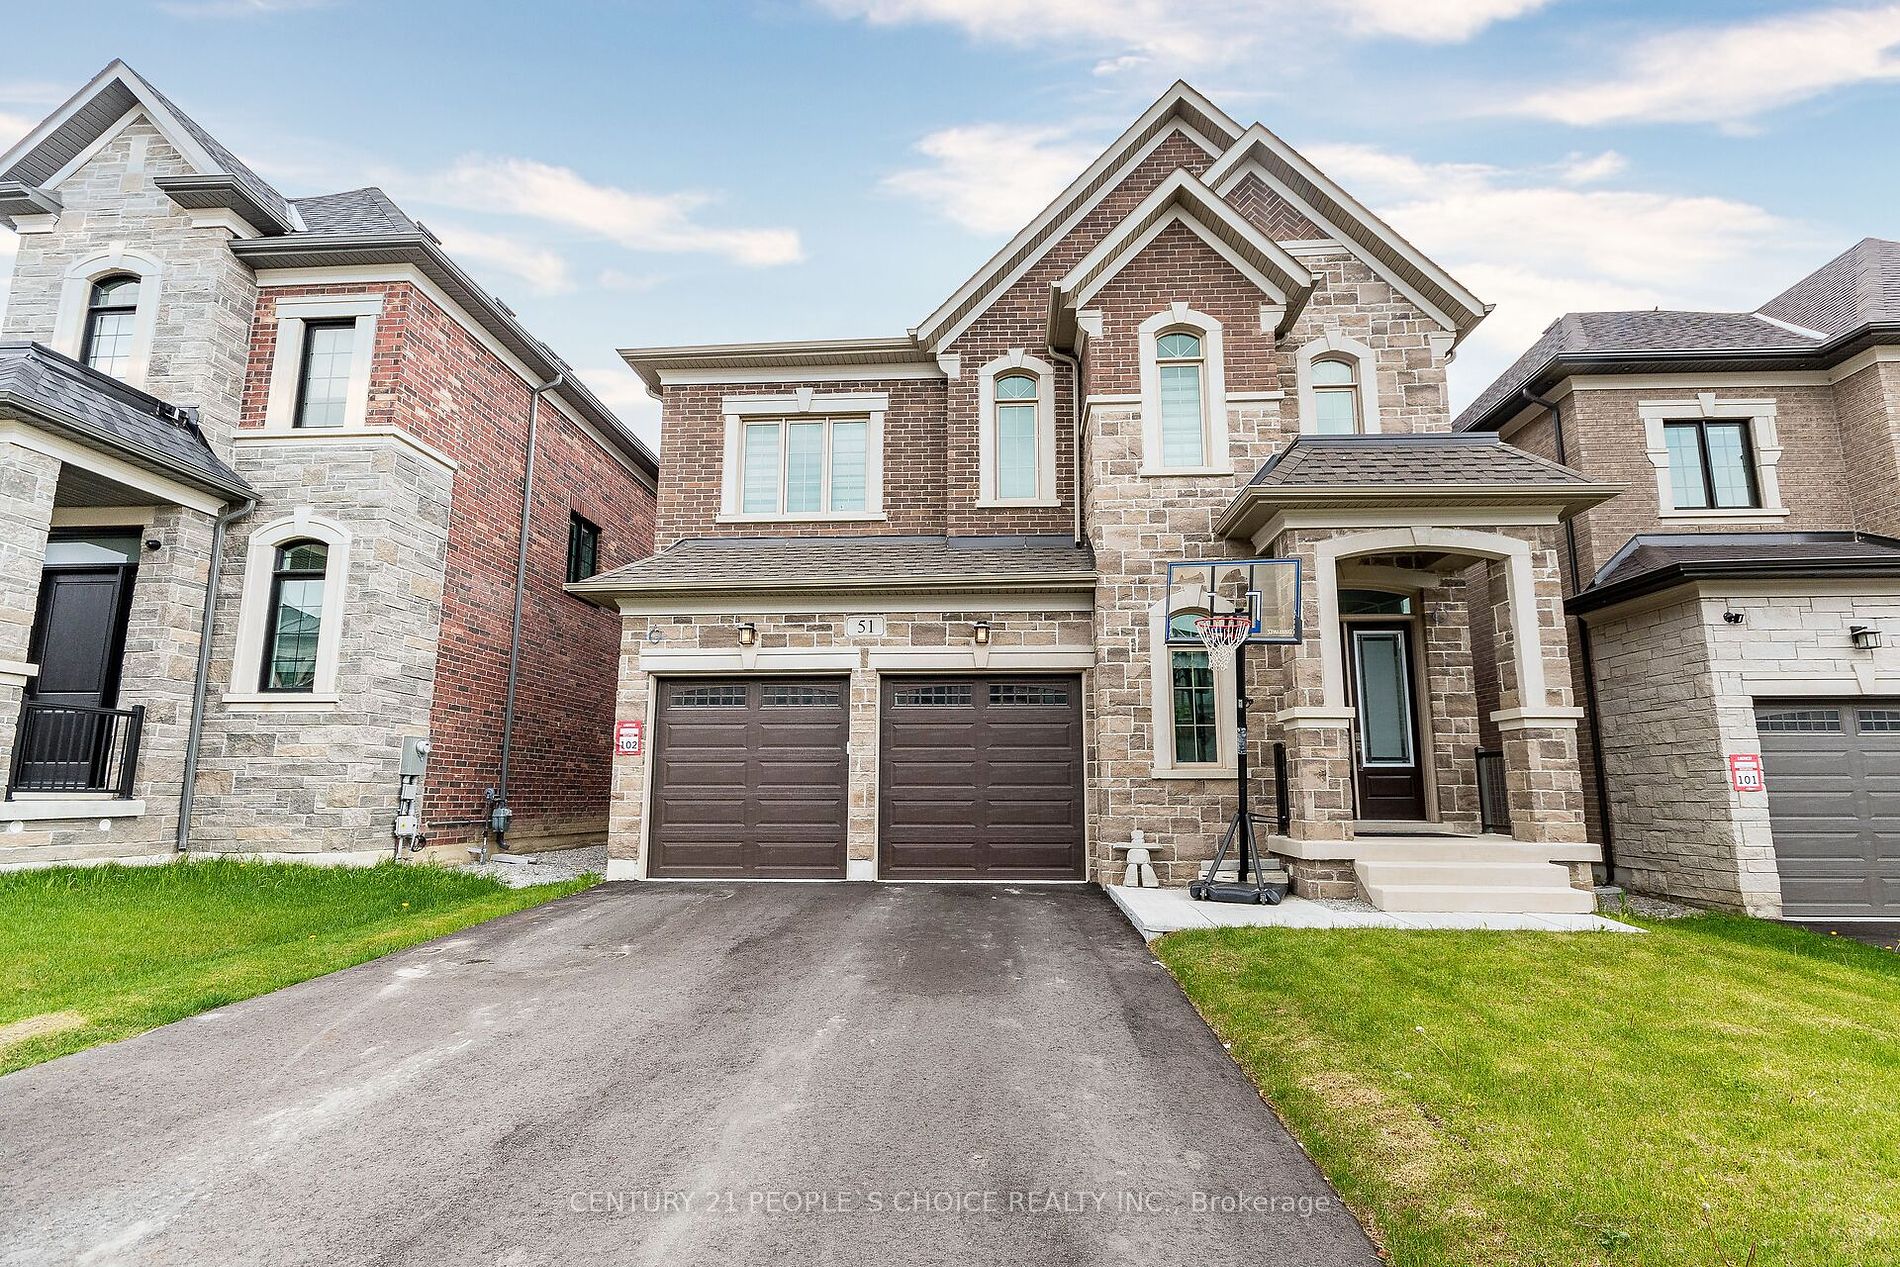 Detached house for sale at 51 Wainfleet Cres Vaughan Ontario